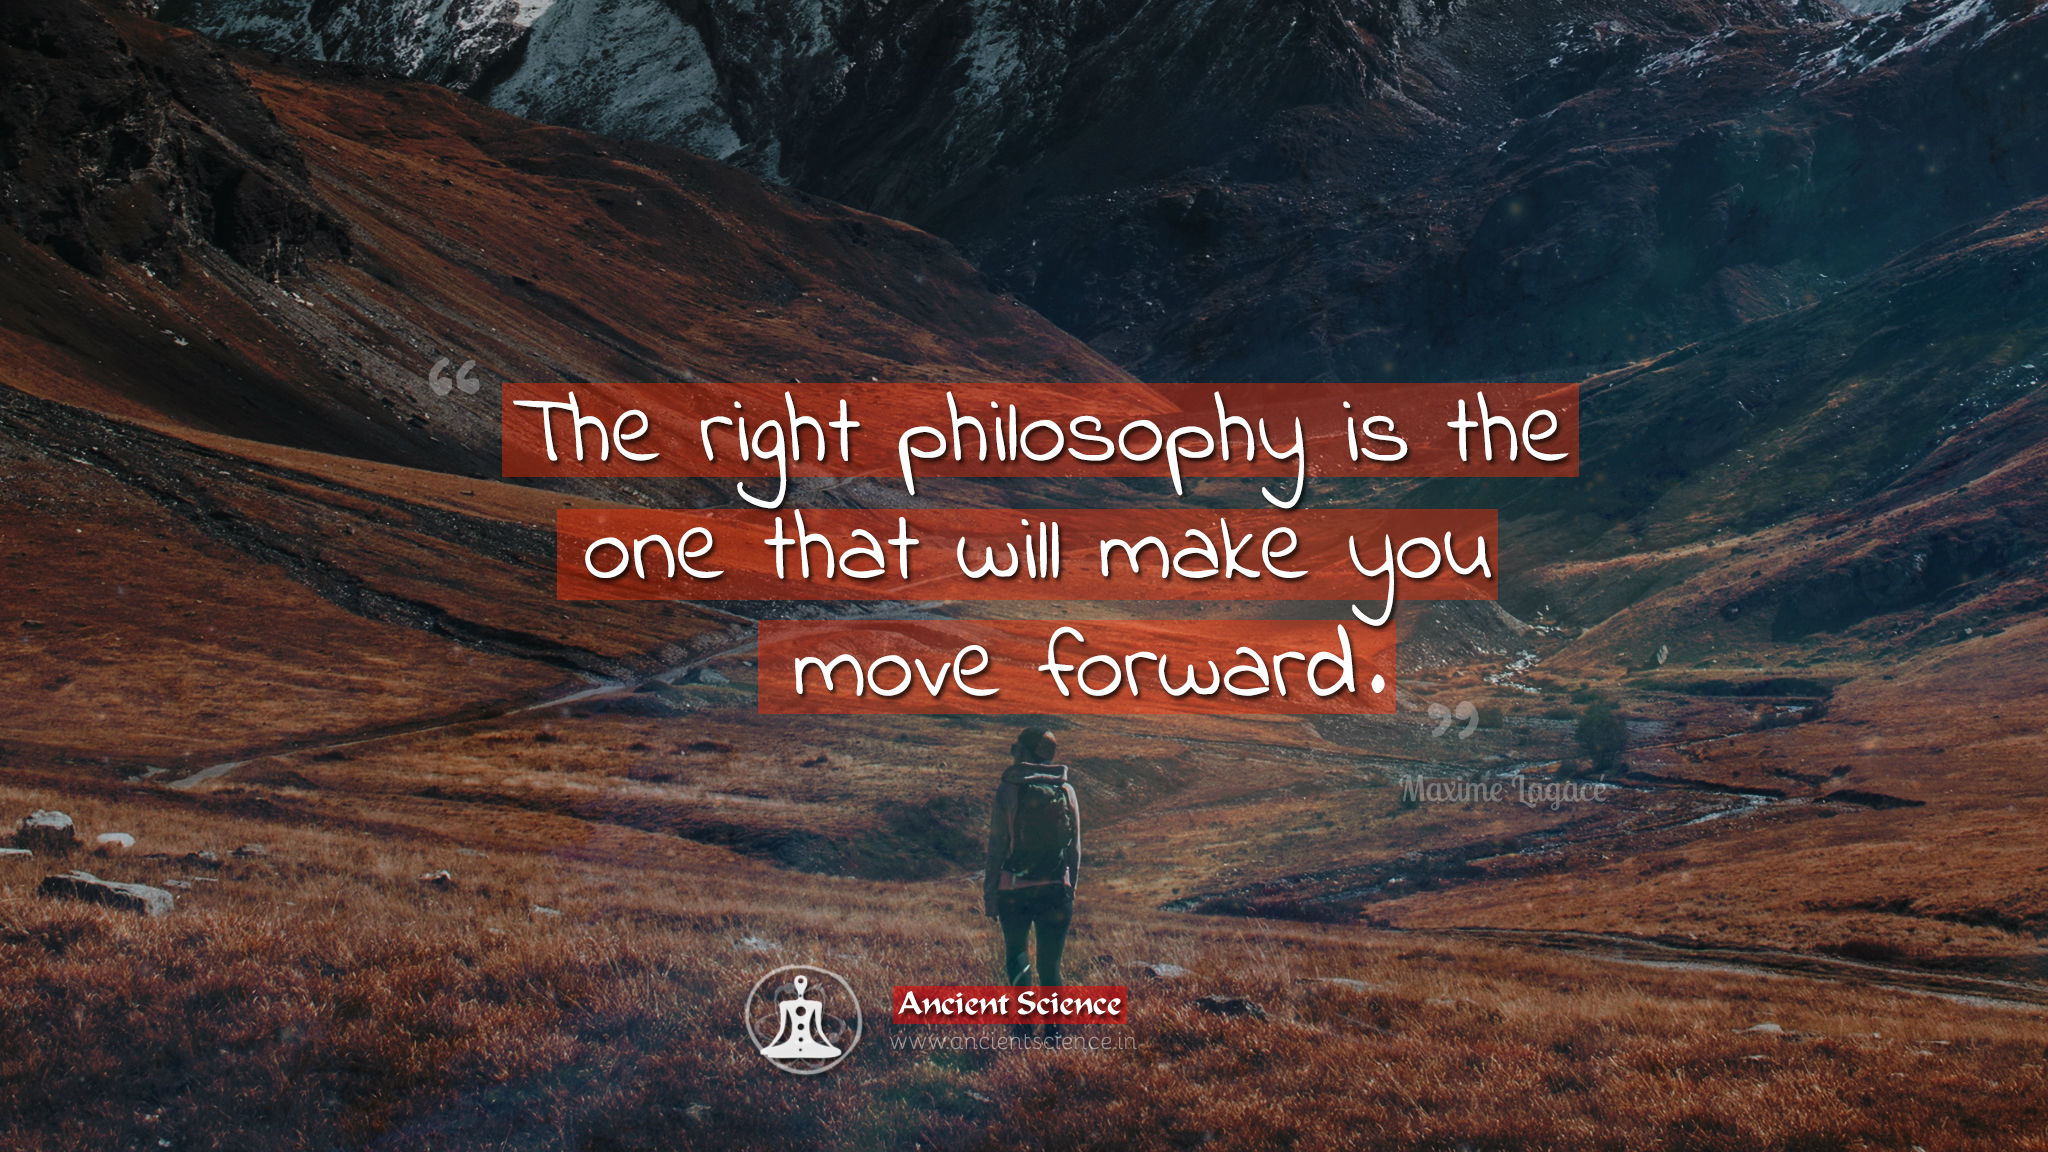 The right philosophy is the one that will make you move forward